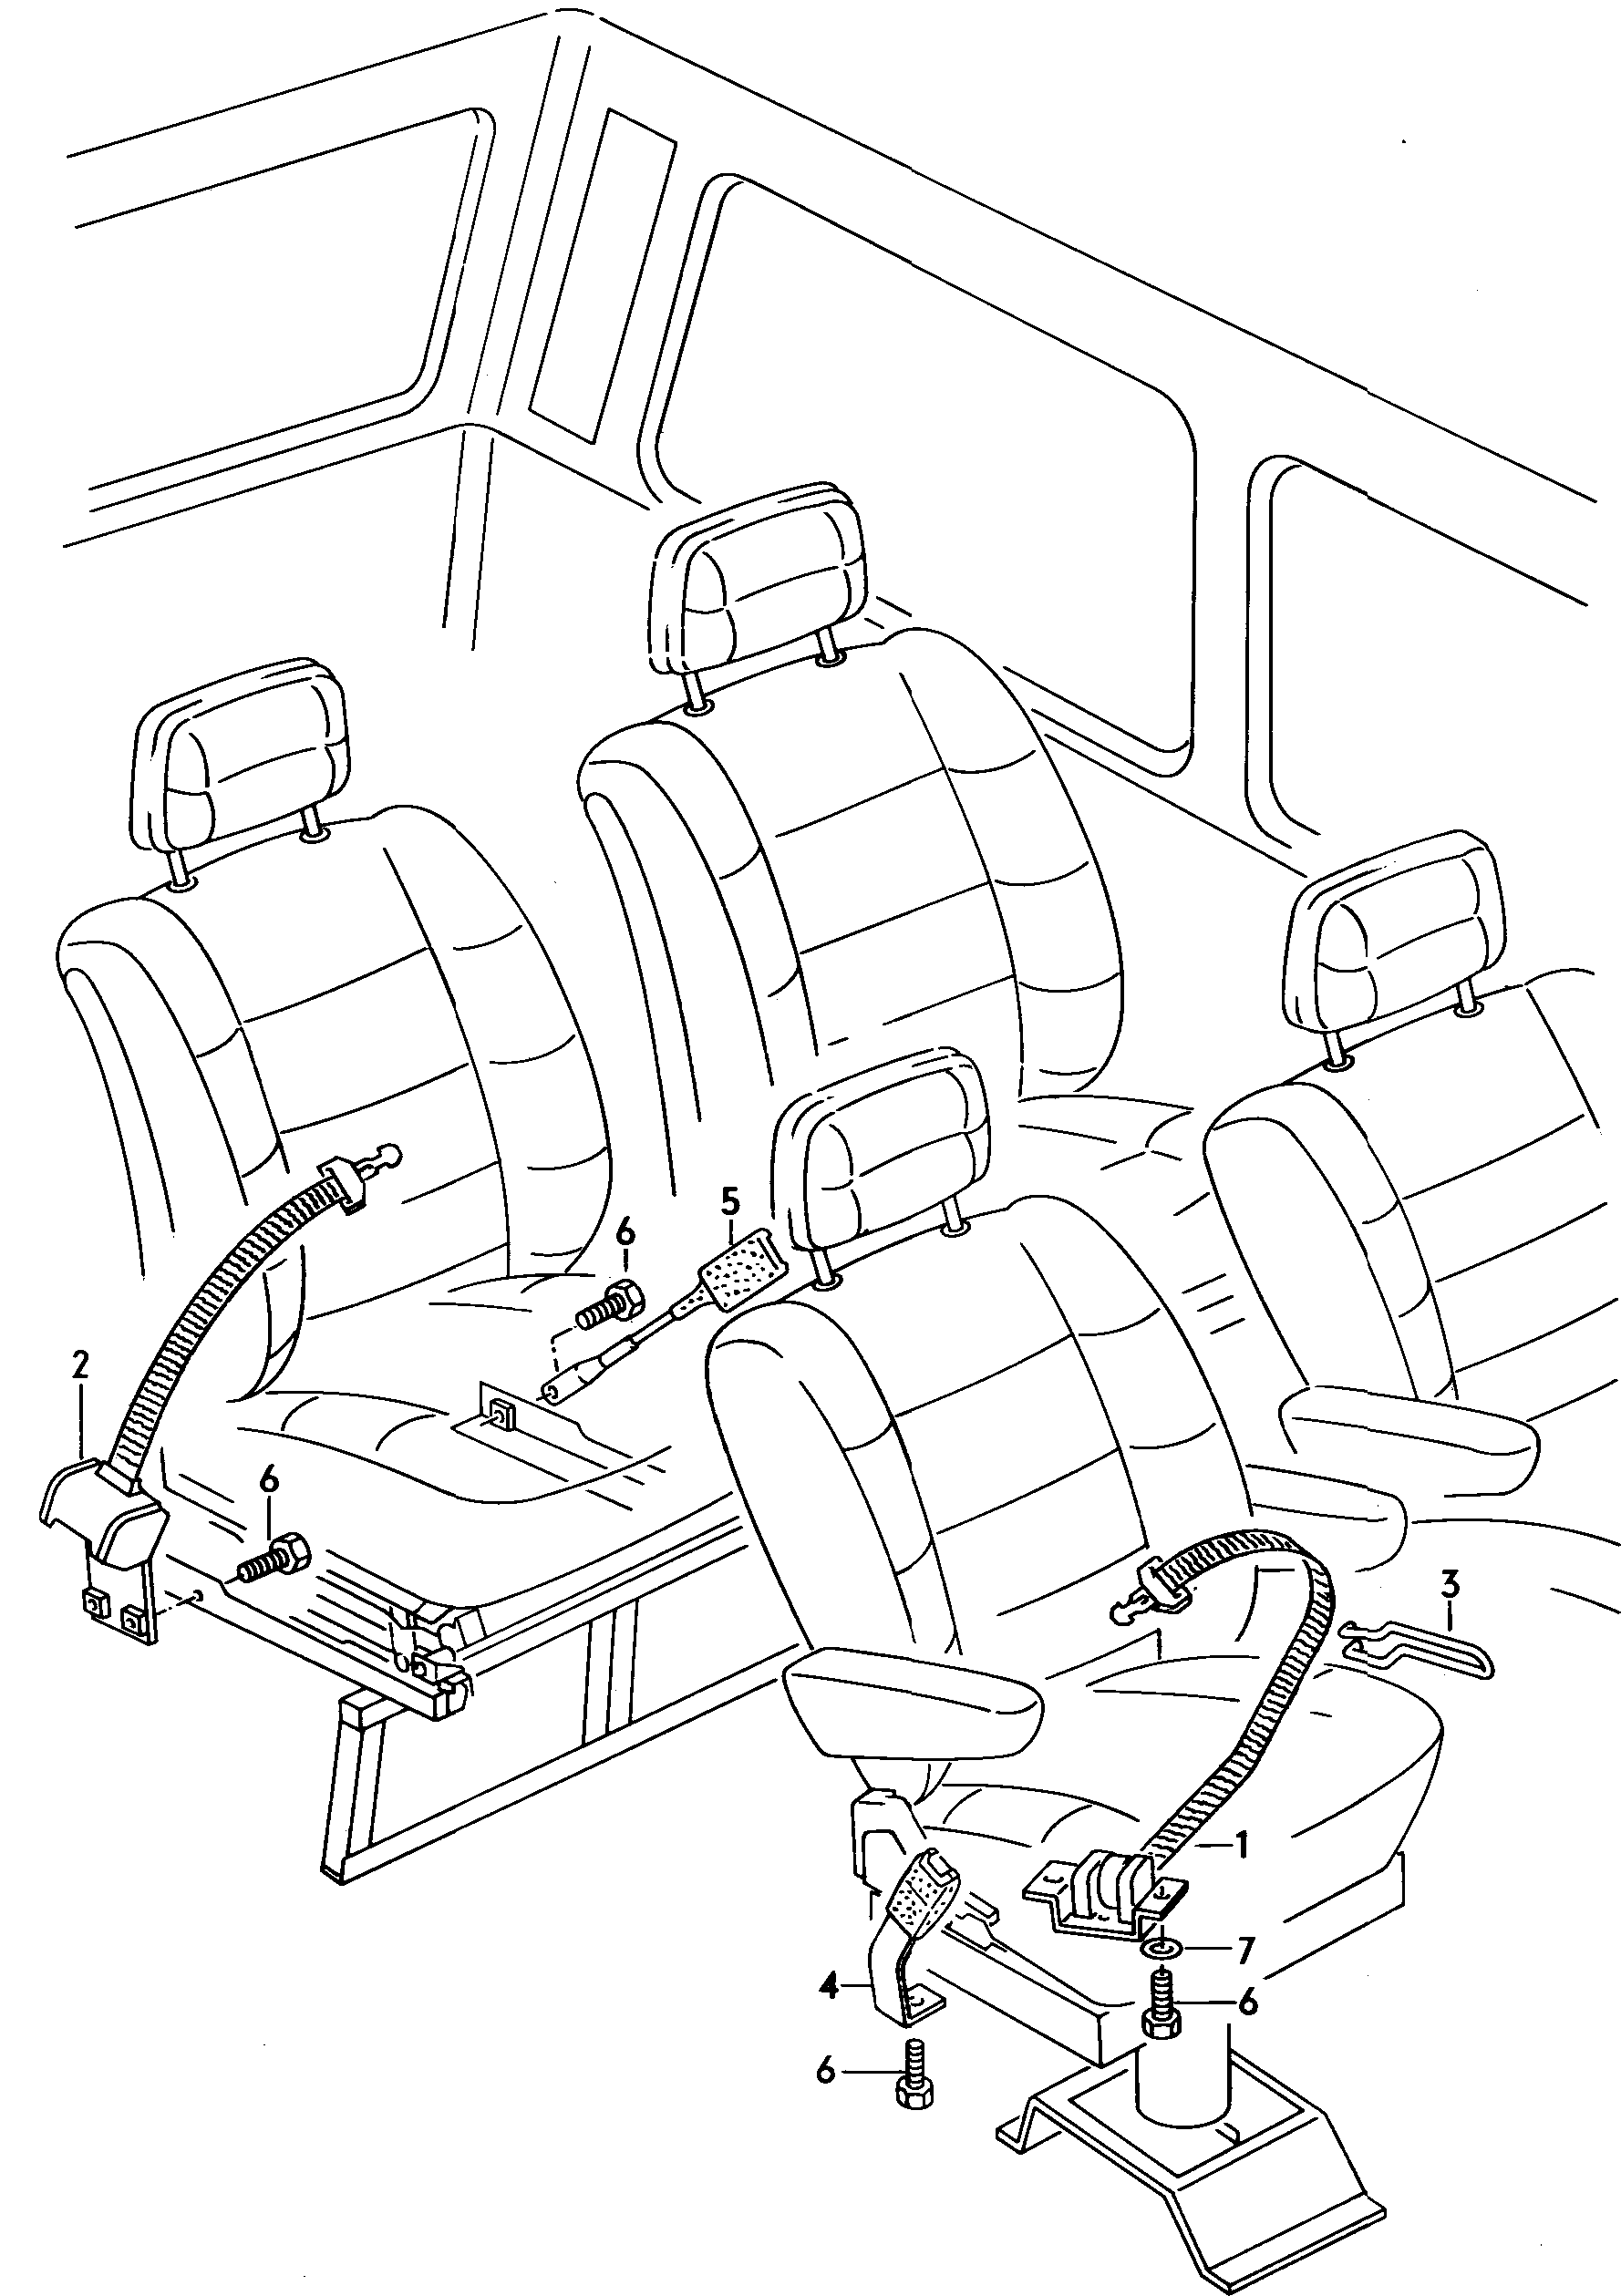 Lap belts in passenger<br>compartment  - Typ 2/syncro - t2